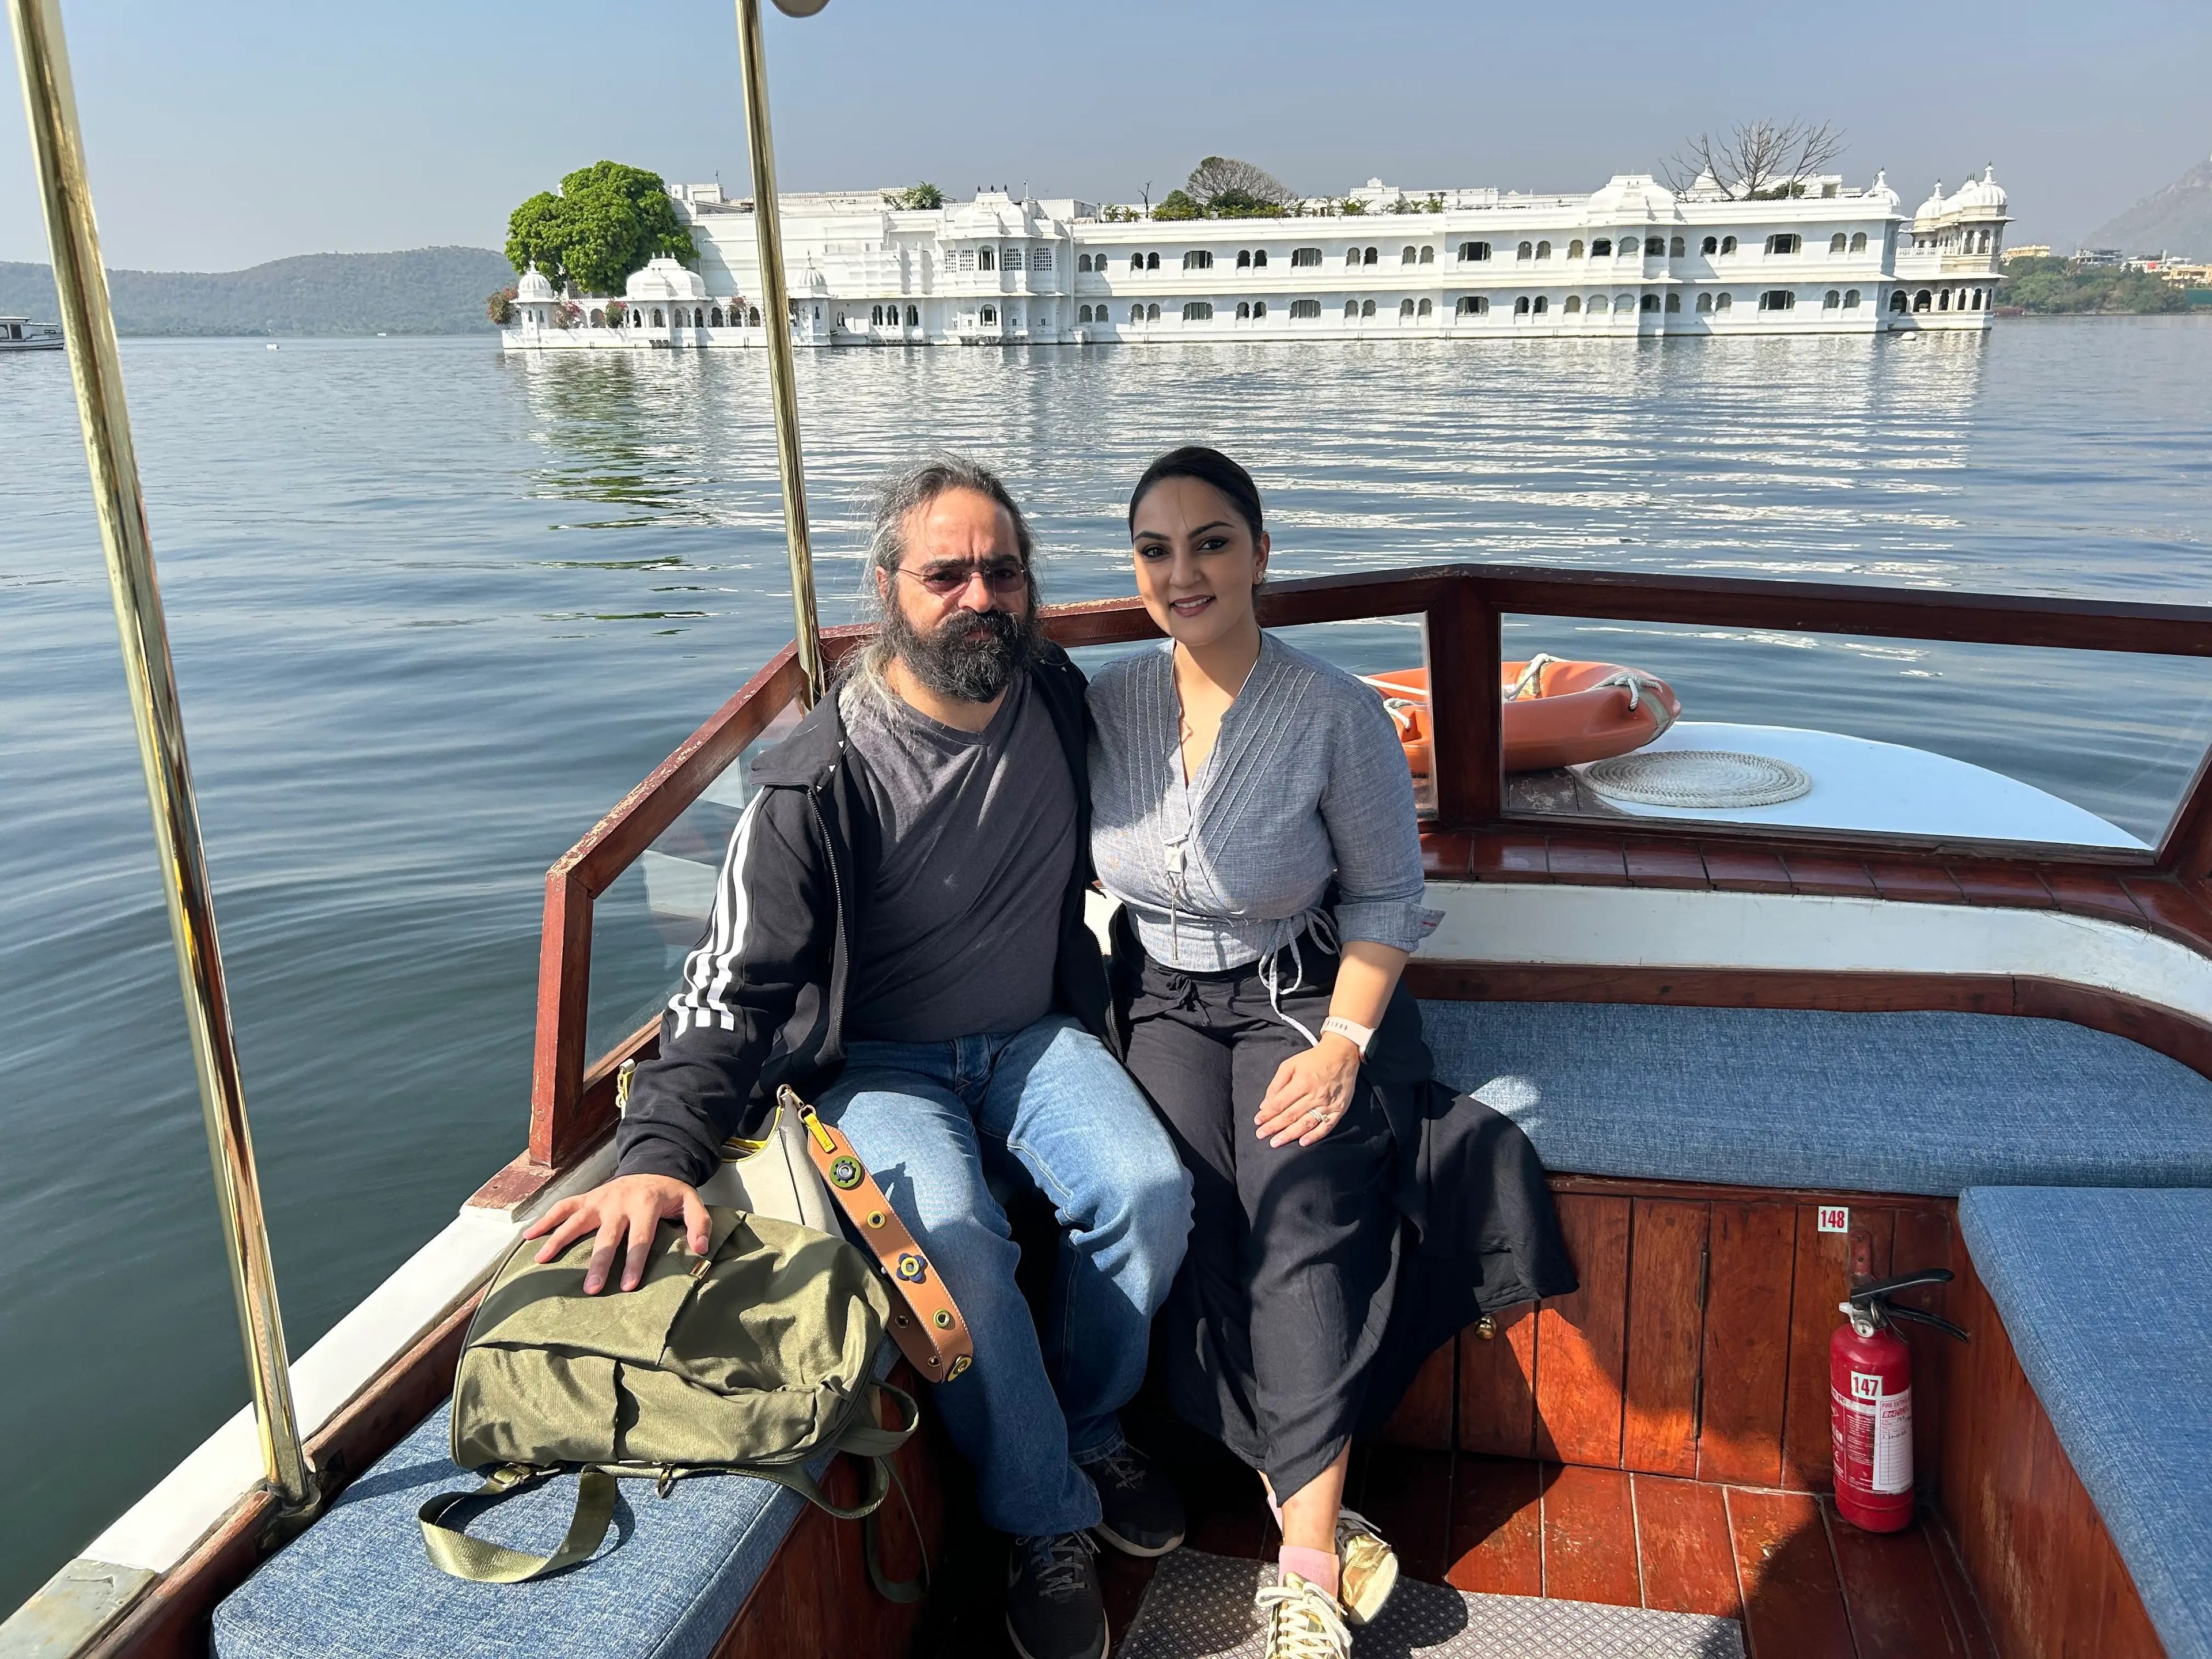 Noor and her husband pose on a boat in front of the Taj Lake Palace hotel.